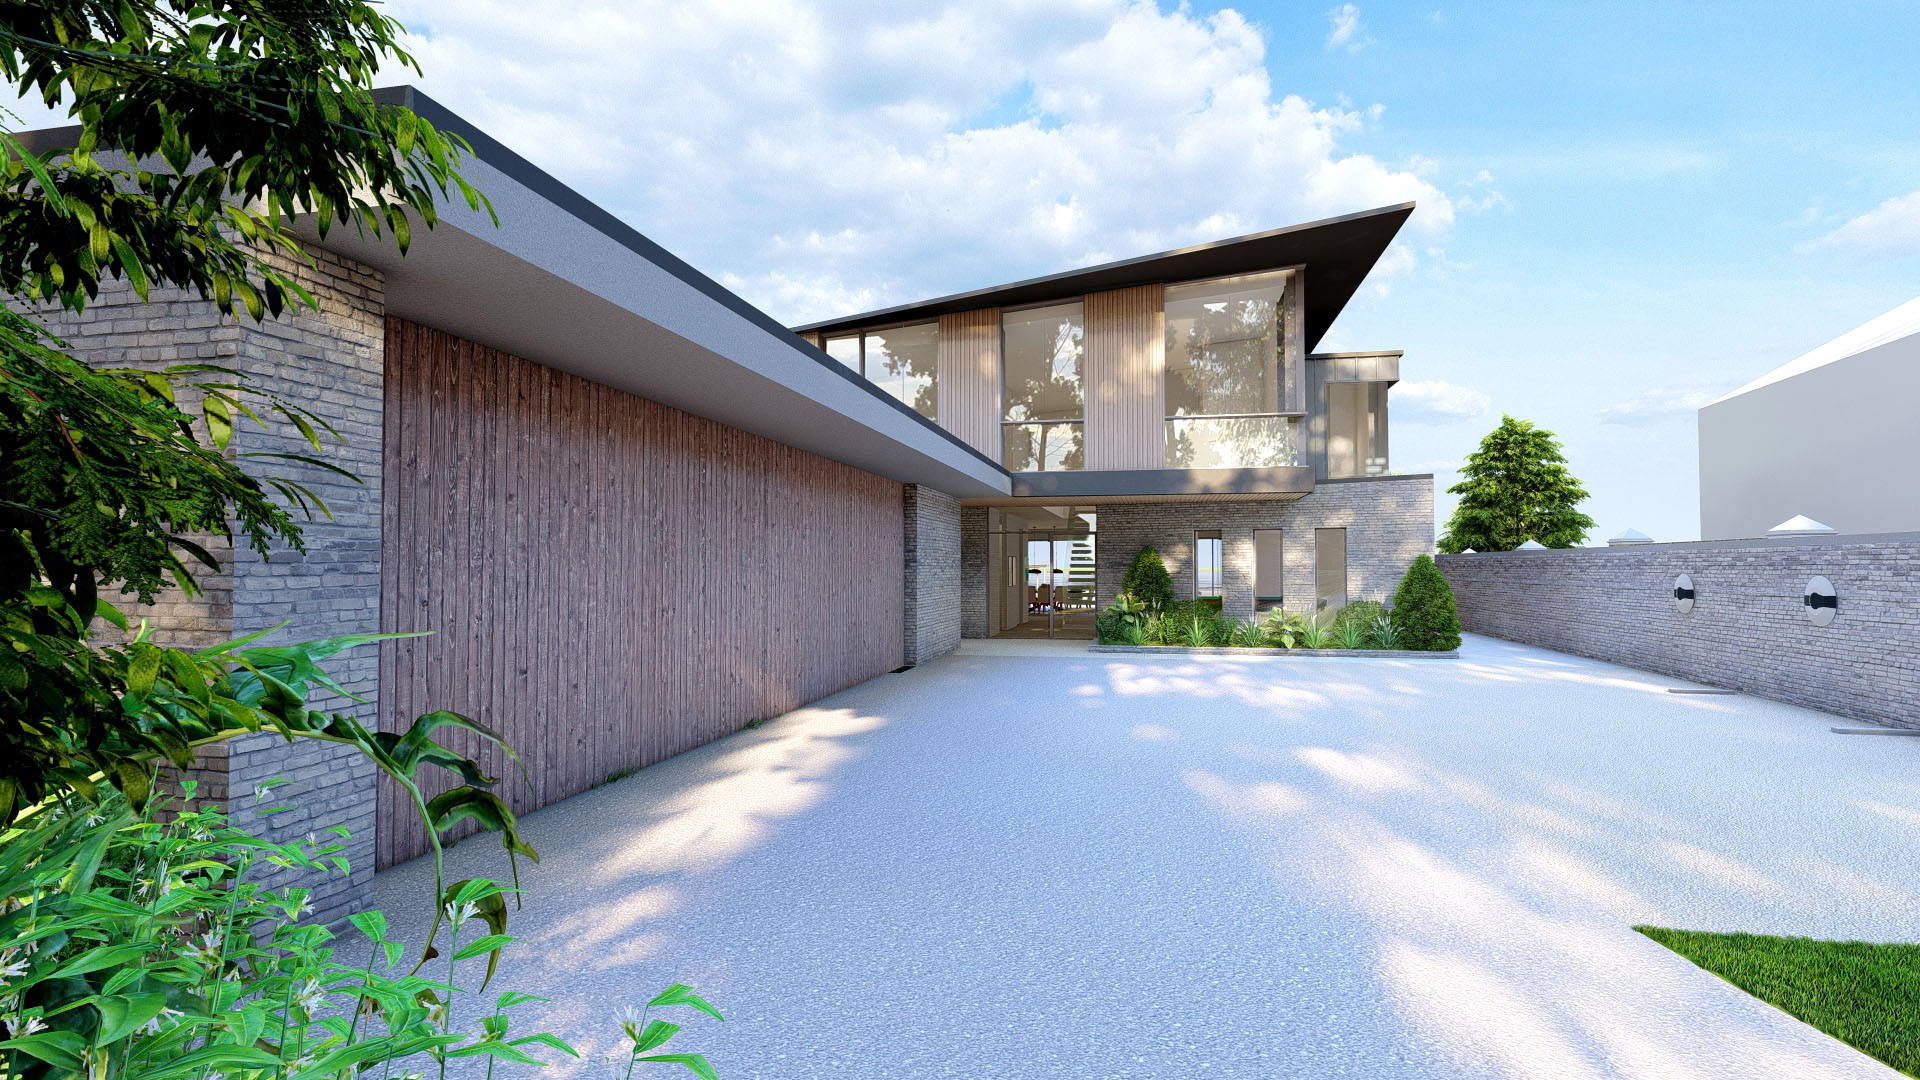 visual of front view of new build with wood cladding, stone walls and a large garage